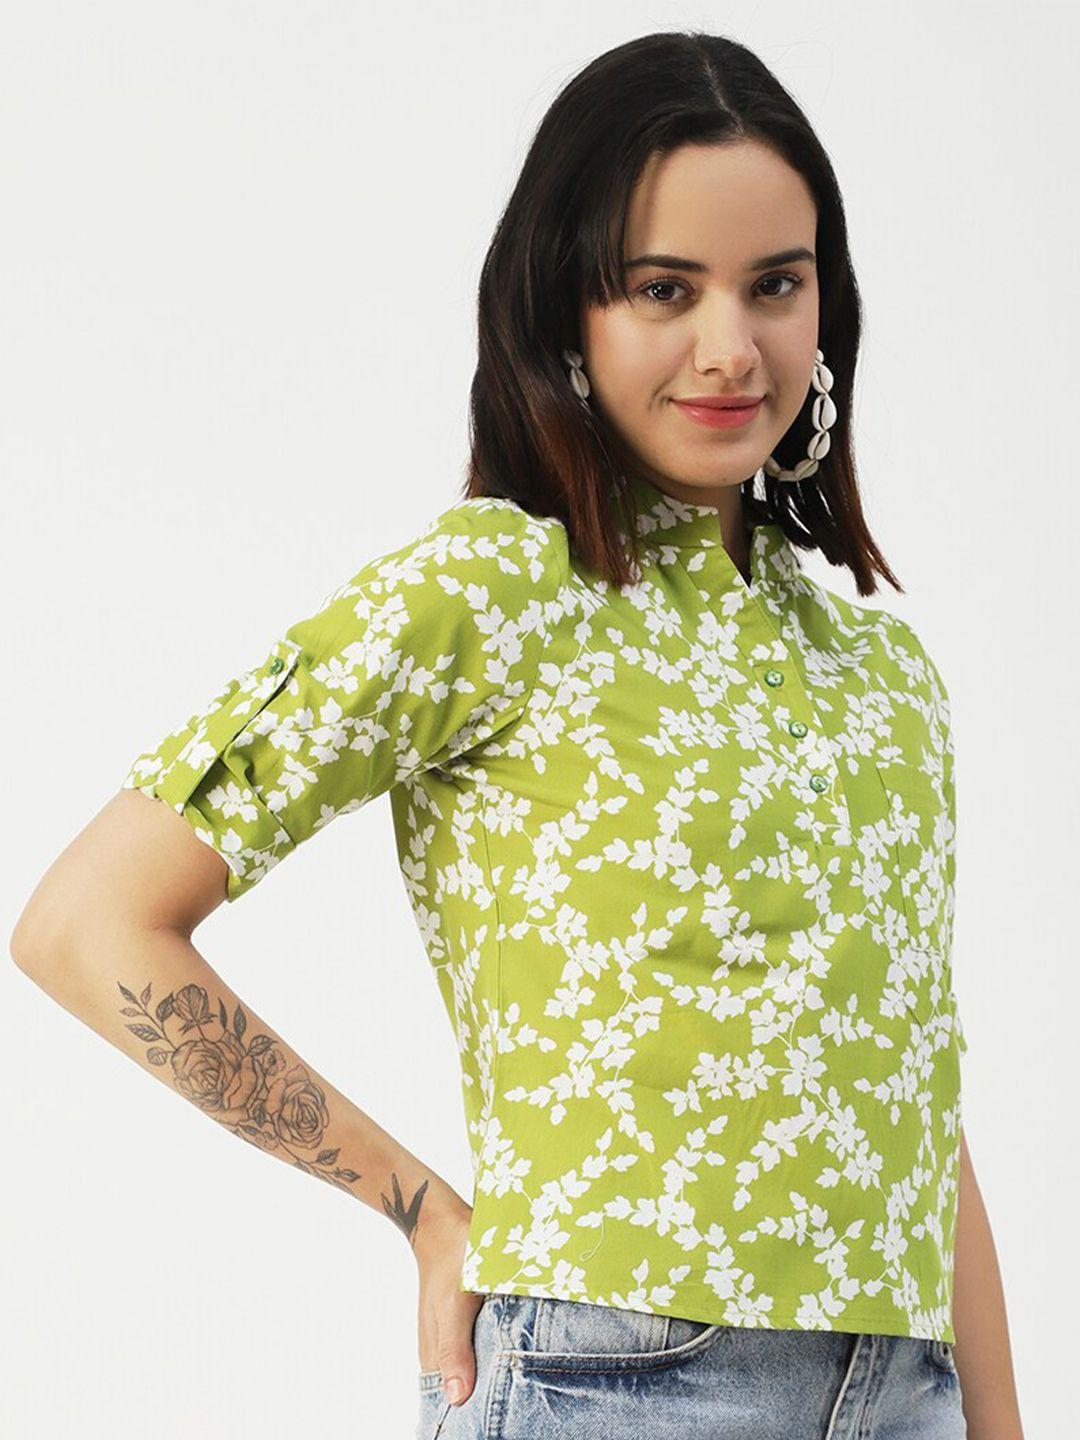 moomaya green floral print roll-up sleeves cotton shirt style top